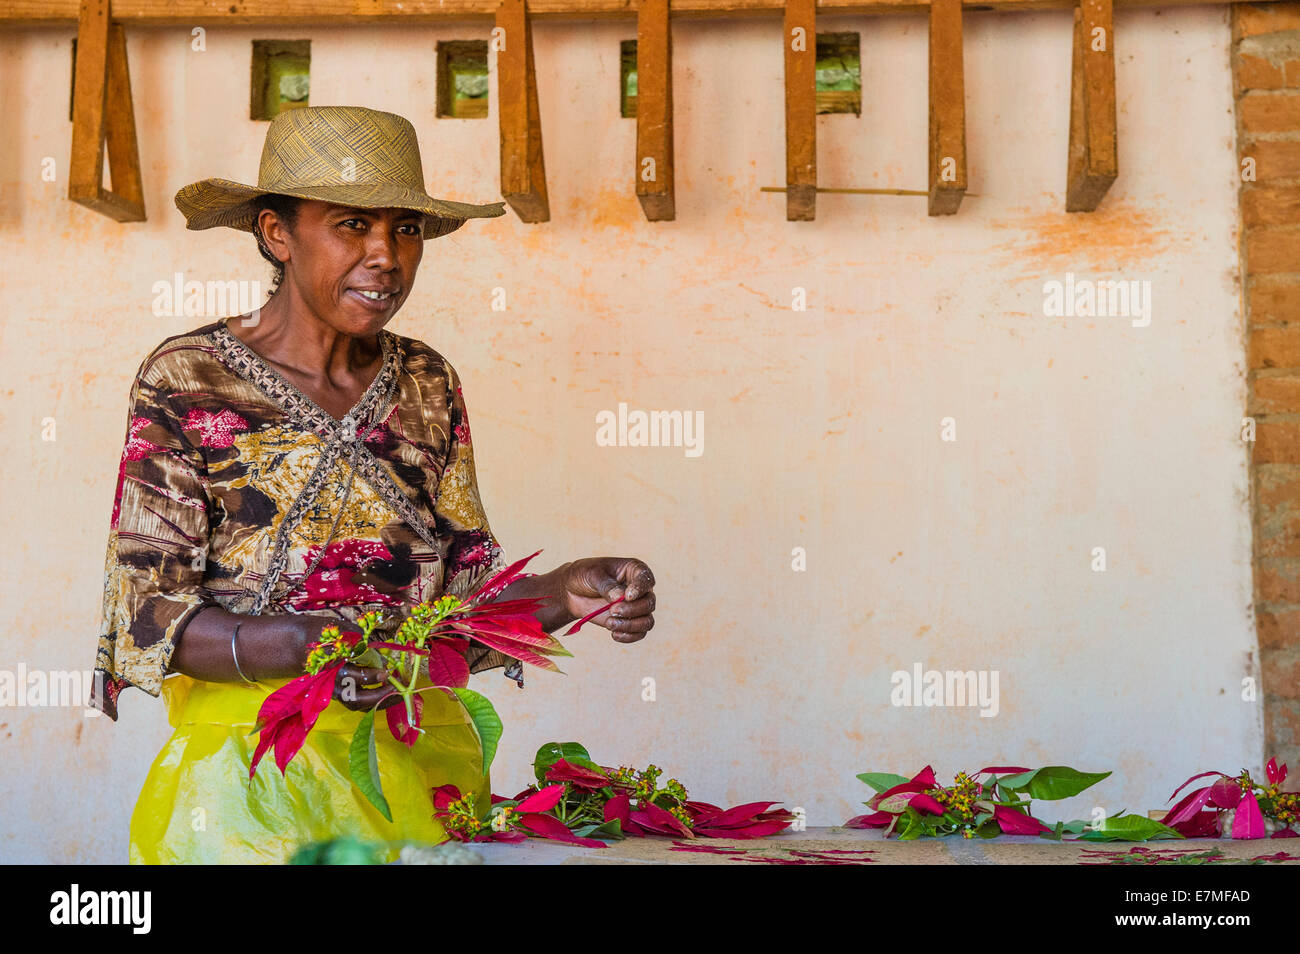 A lady preparing flowers to decorate paper in Madagascar Stock Photo